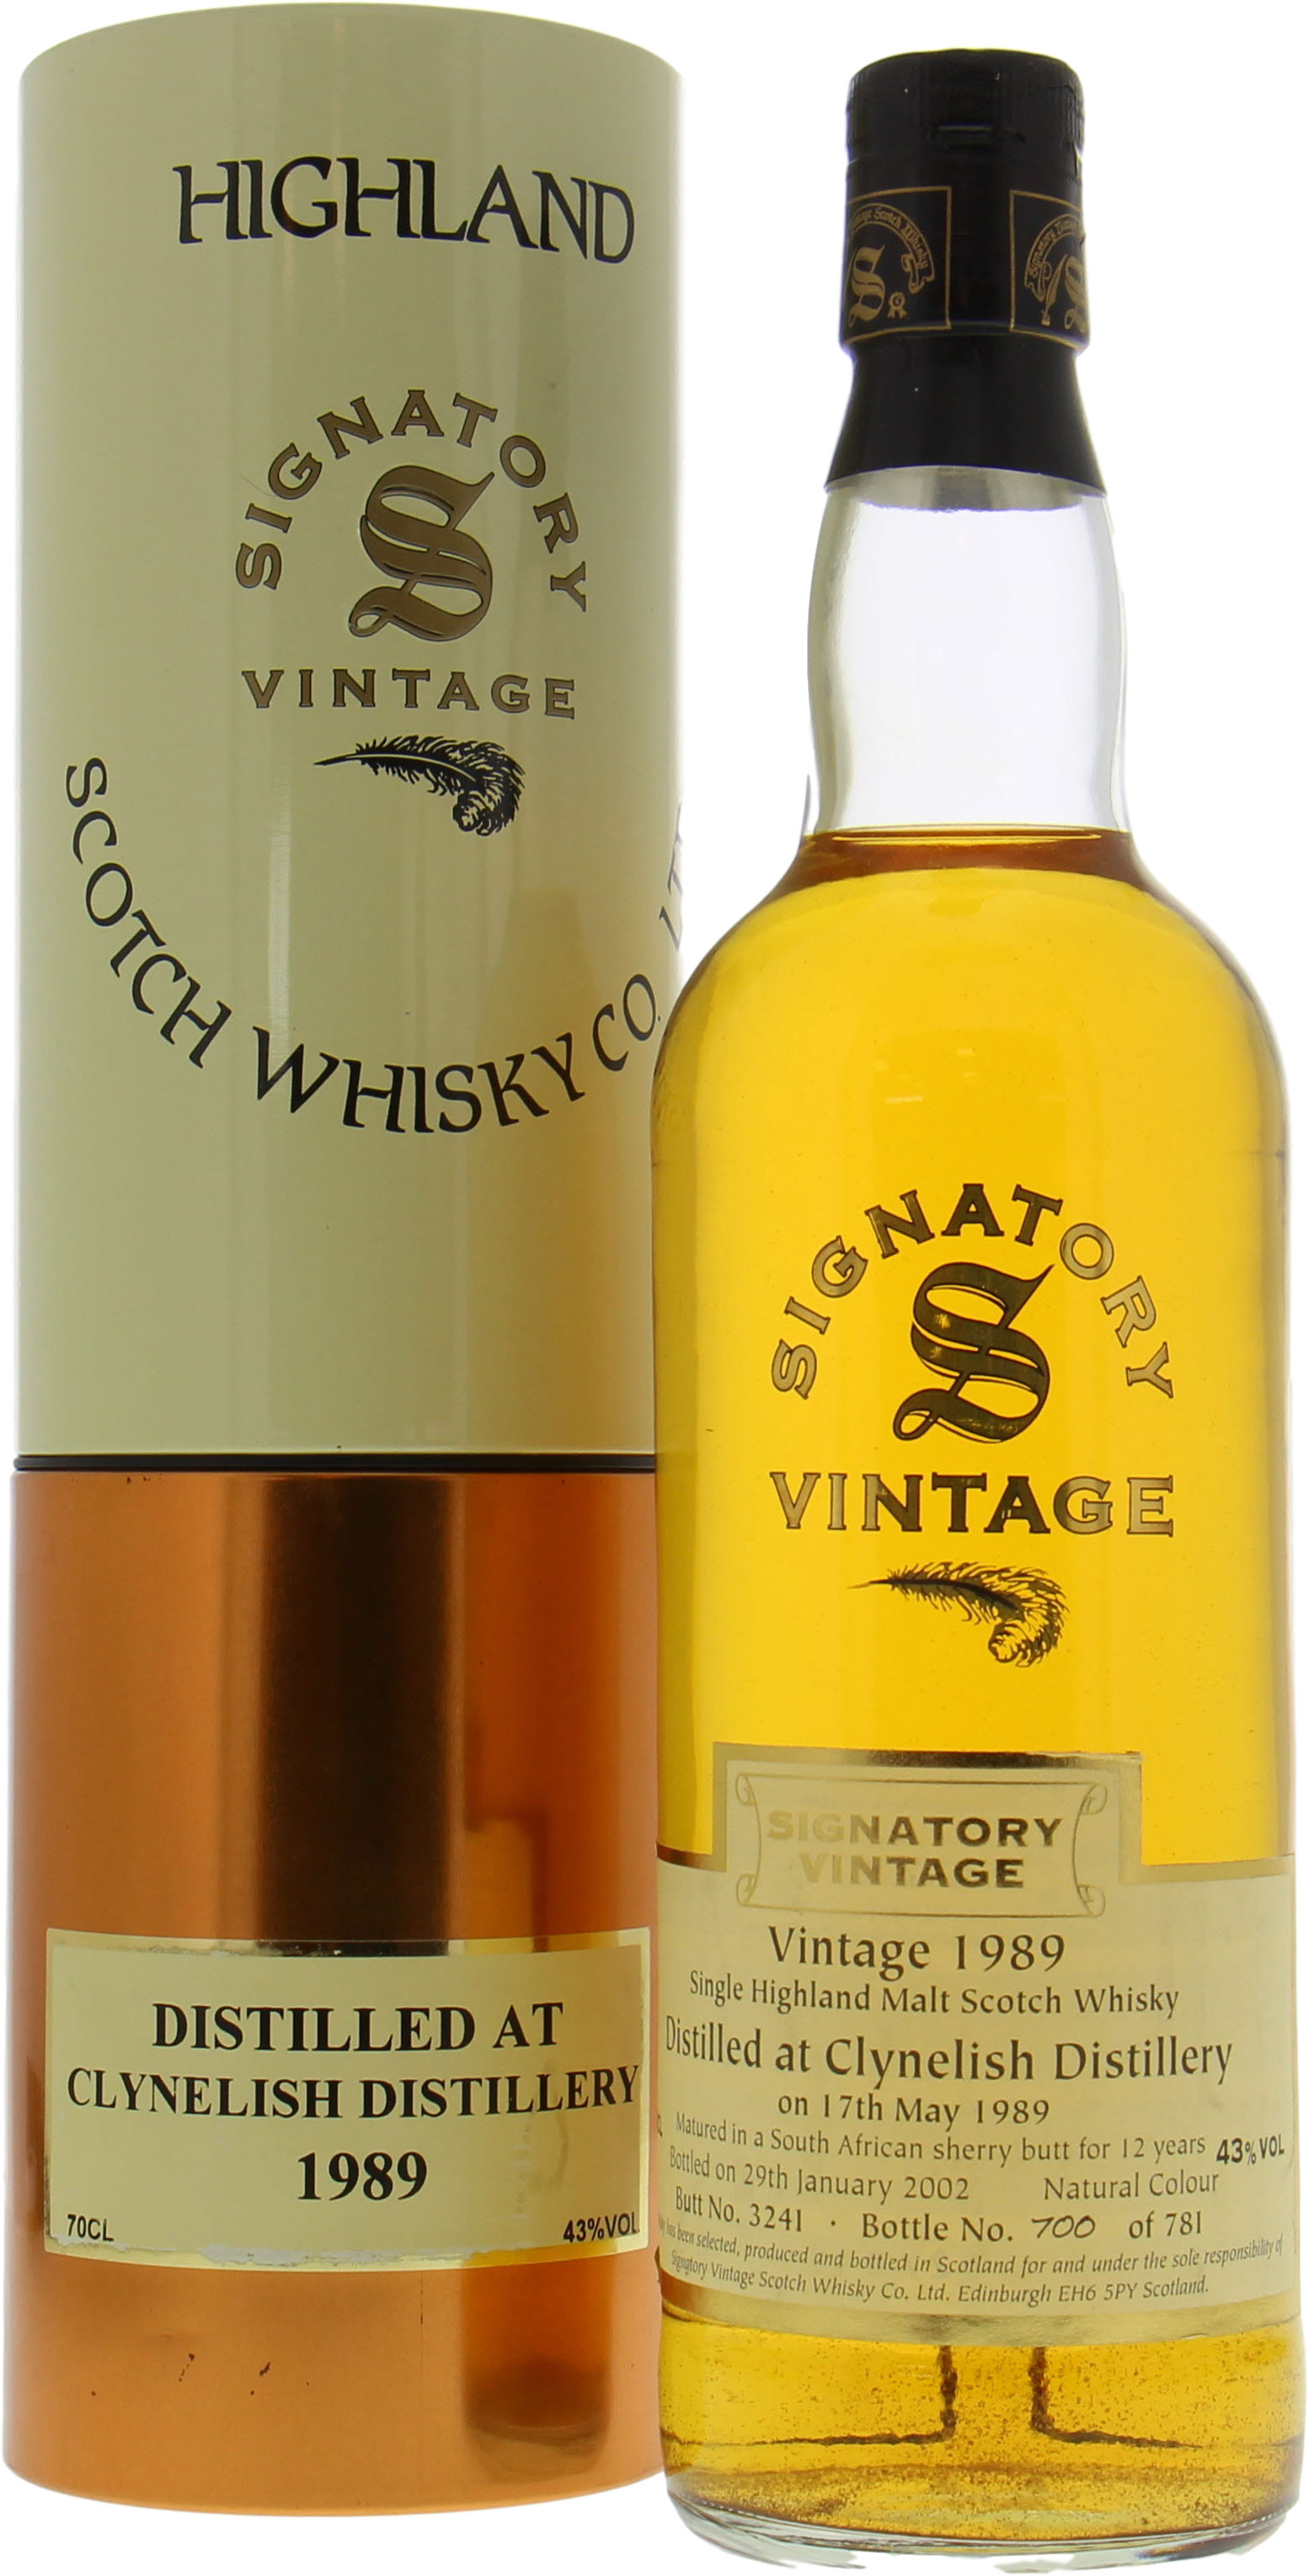 Clynelish - 12 Years Old Signatory Vintage Cask 3241 43% 1989 In Original Container